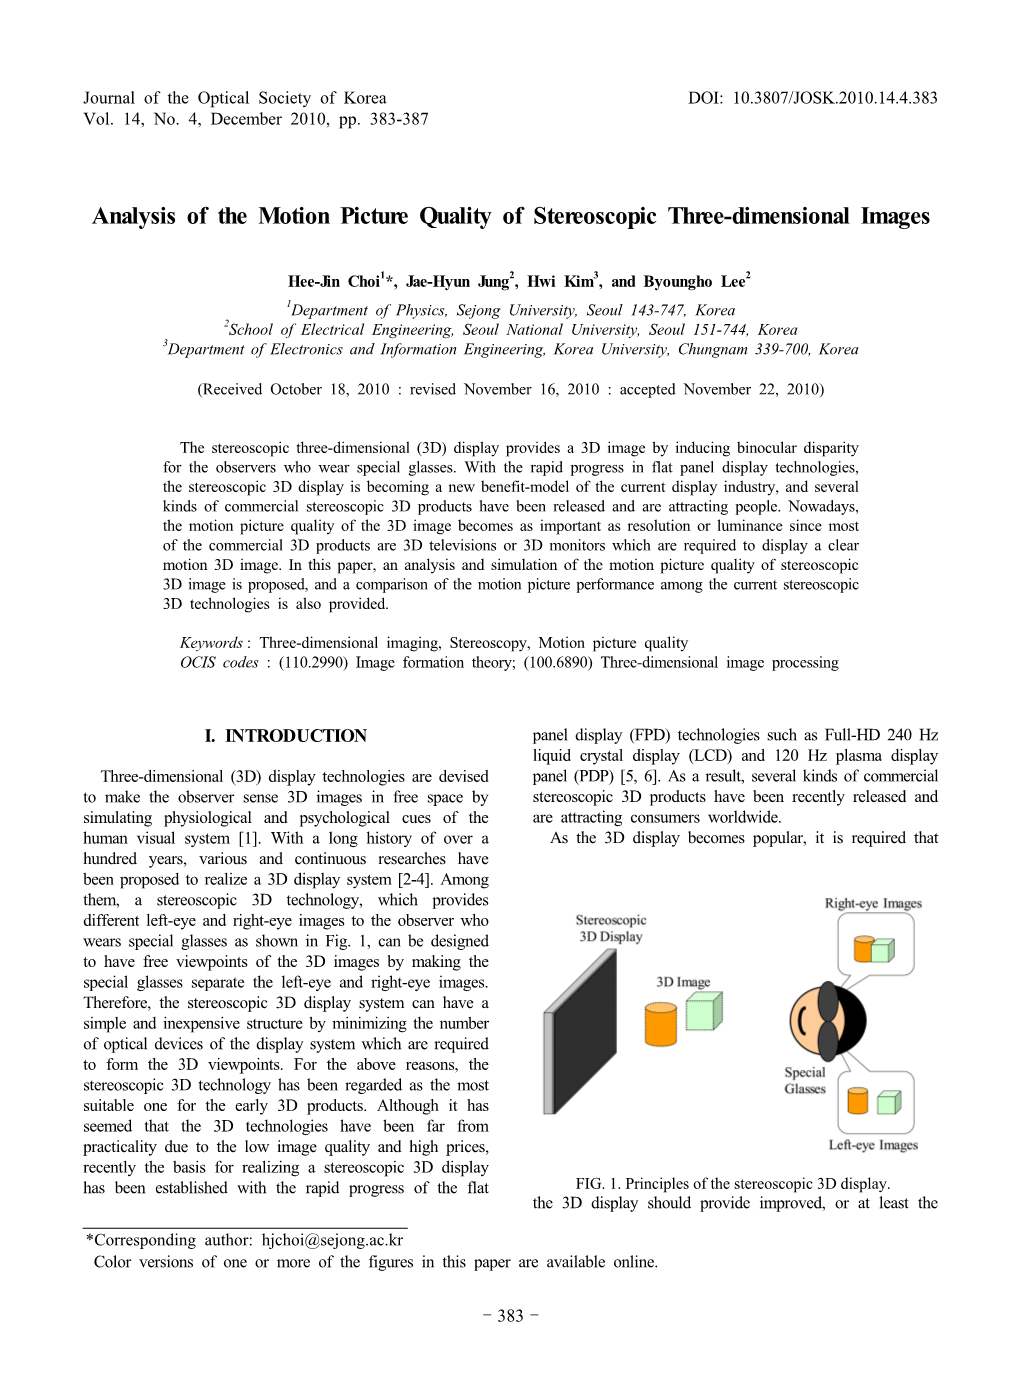 Analysis of the Motion Picture Quality of Stereoscopic Three-Dimensional Images